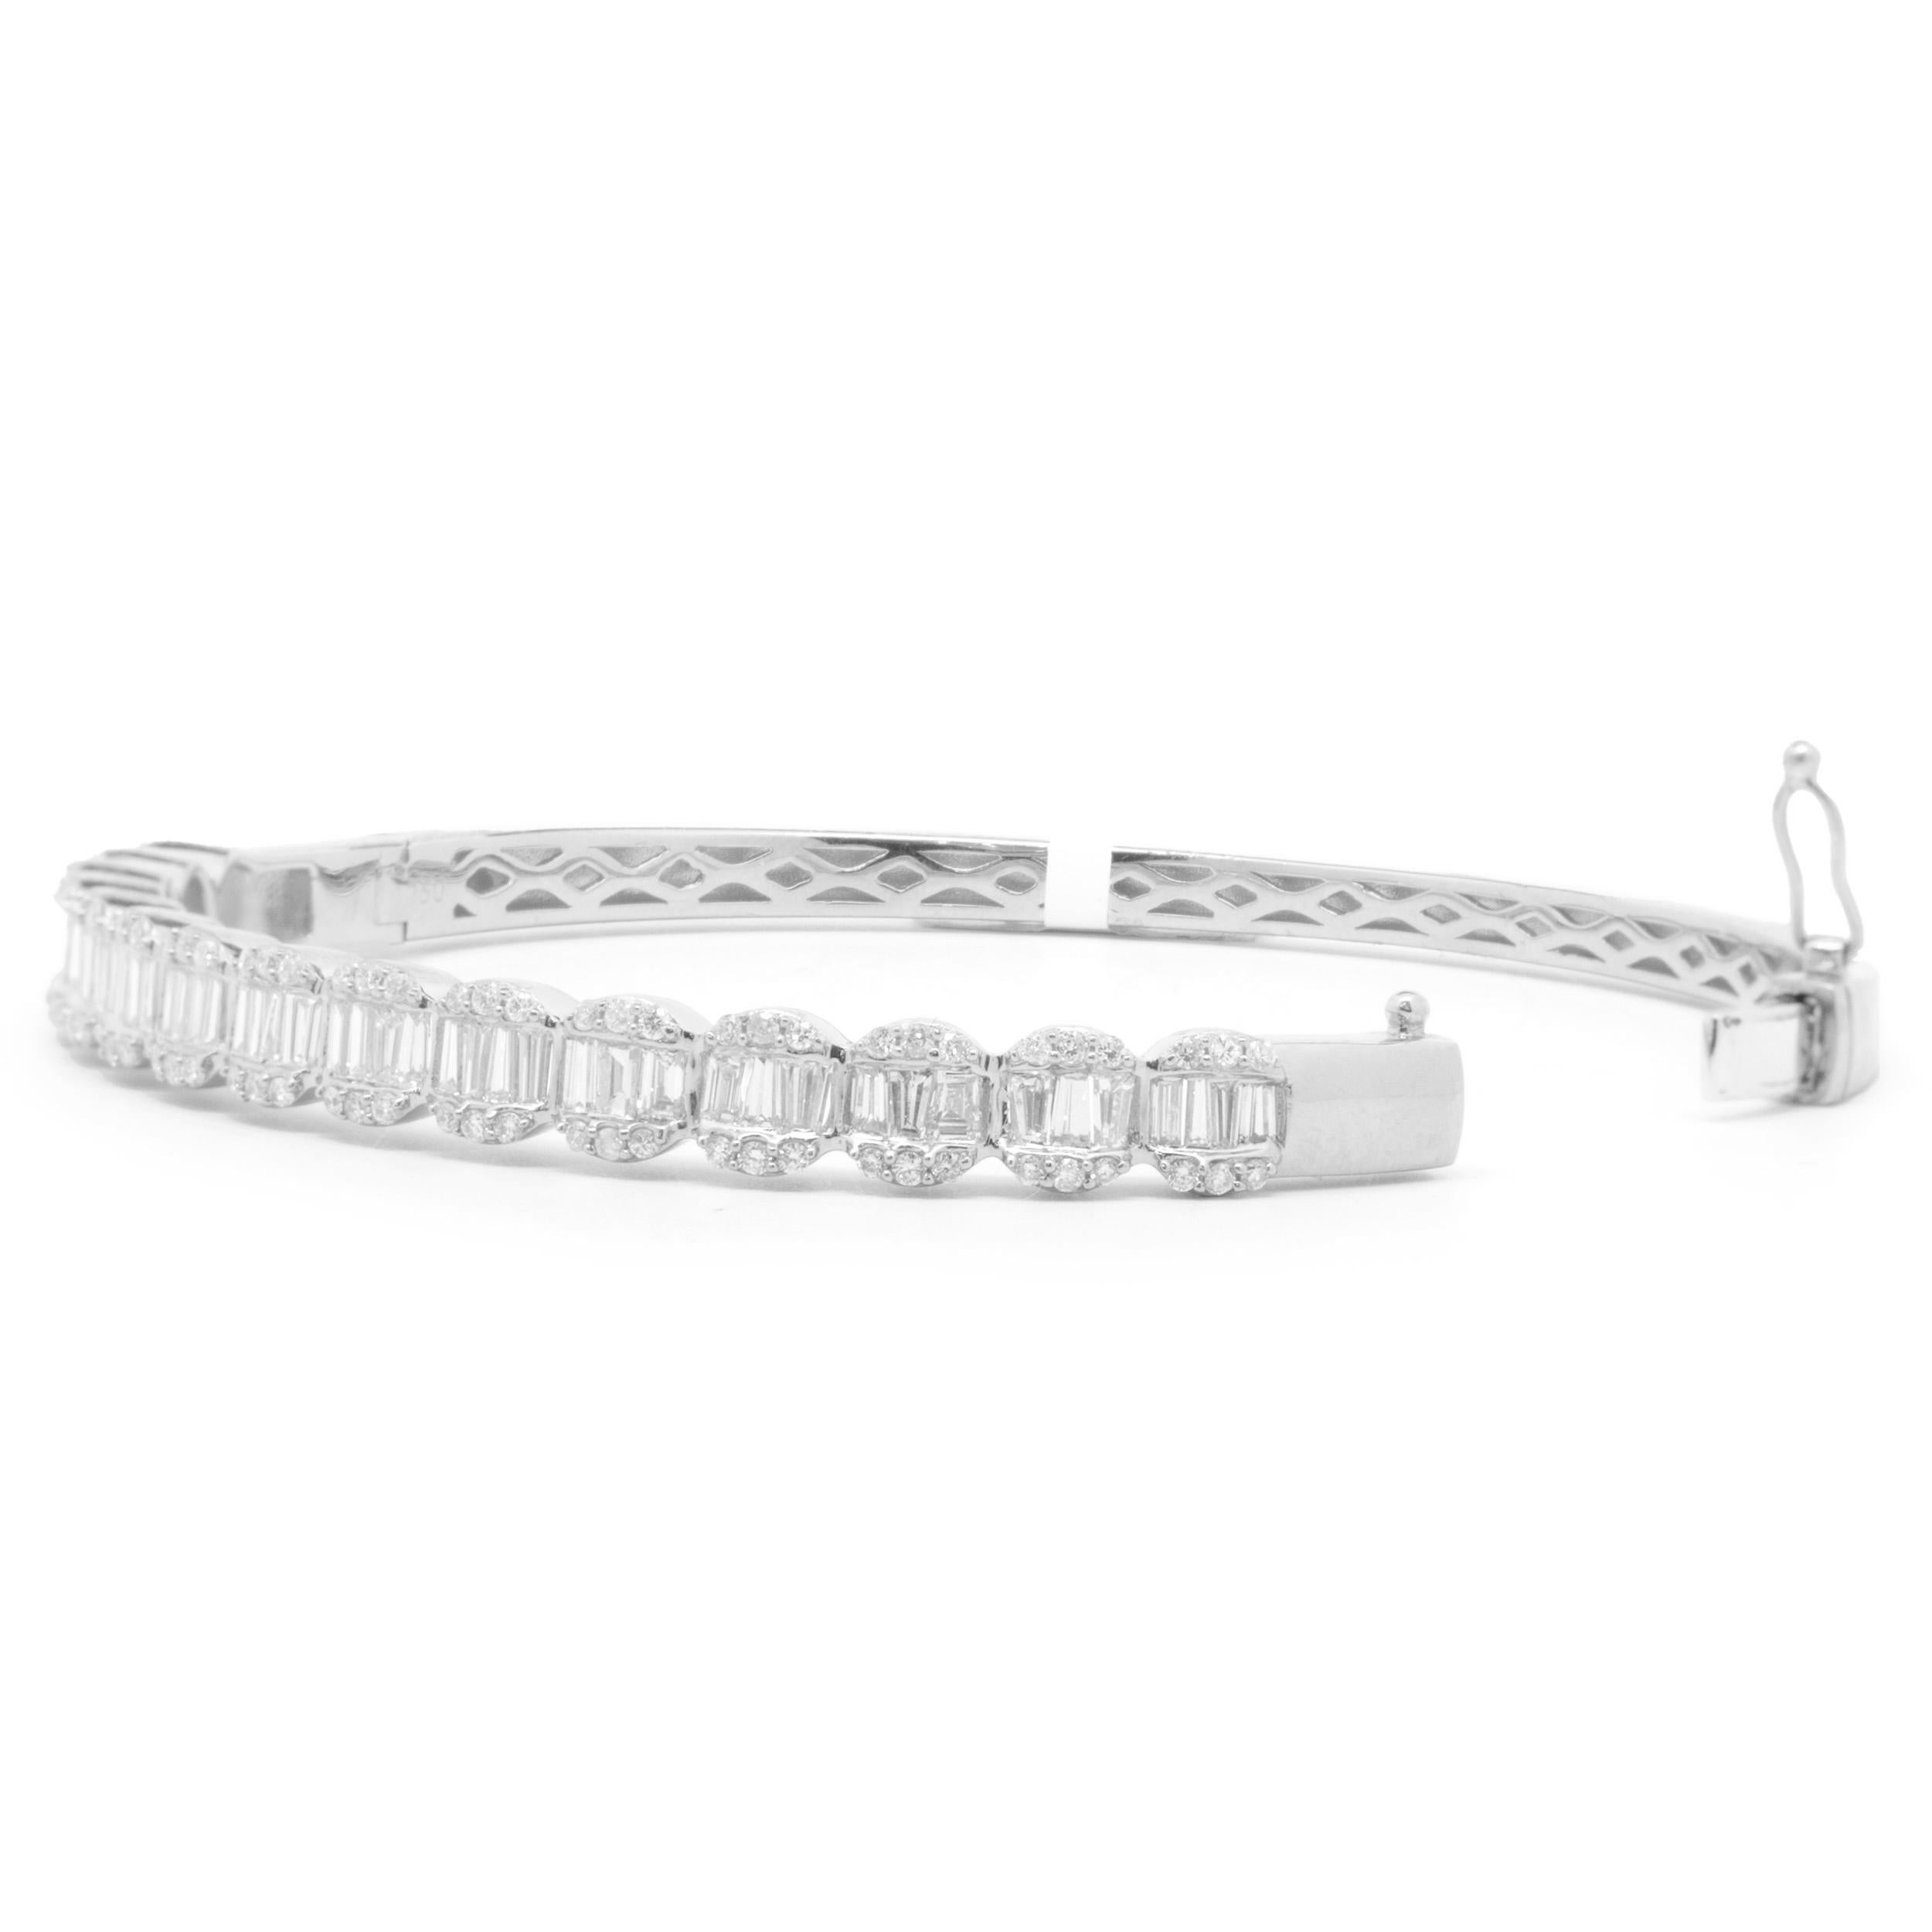 Designer: custom
Material: 18K white gold
Diamonds: 90 round brilliant cut = 0.50cttw
Color: F 
Clarity: VS2
Diamonds: 57 baguette cut = 1.80cttw
Color: F 
Clarity: VS2
Dimensions: bracelet will fit up to a 7.5-inch wrist
Weight: 18.08 grams